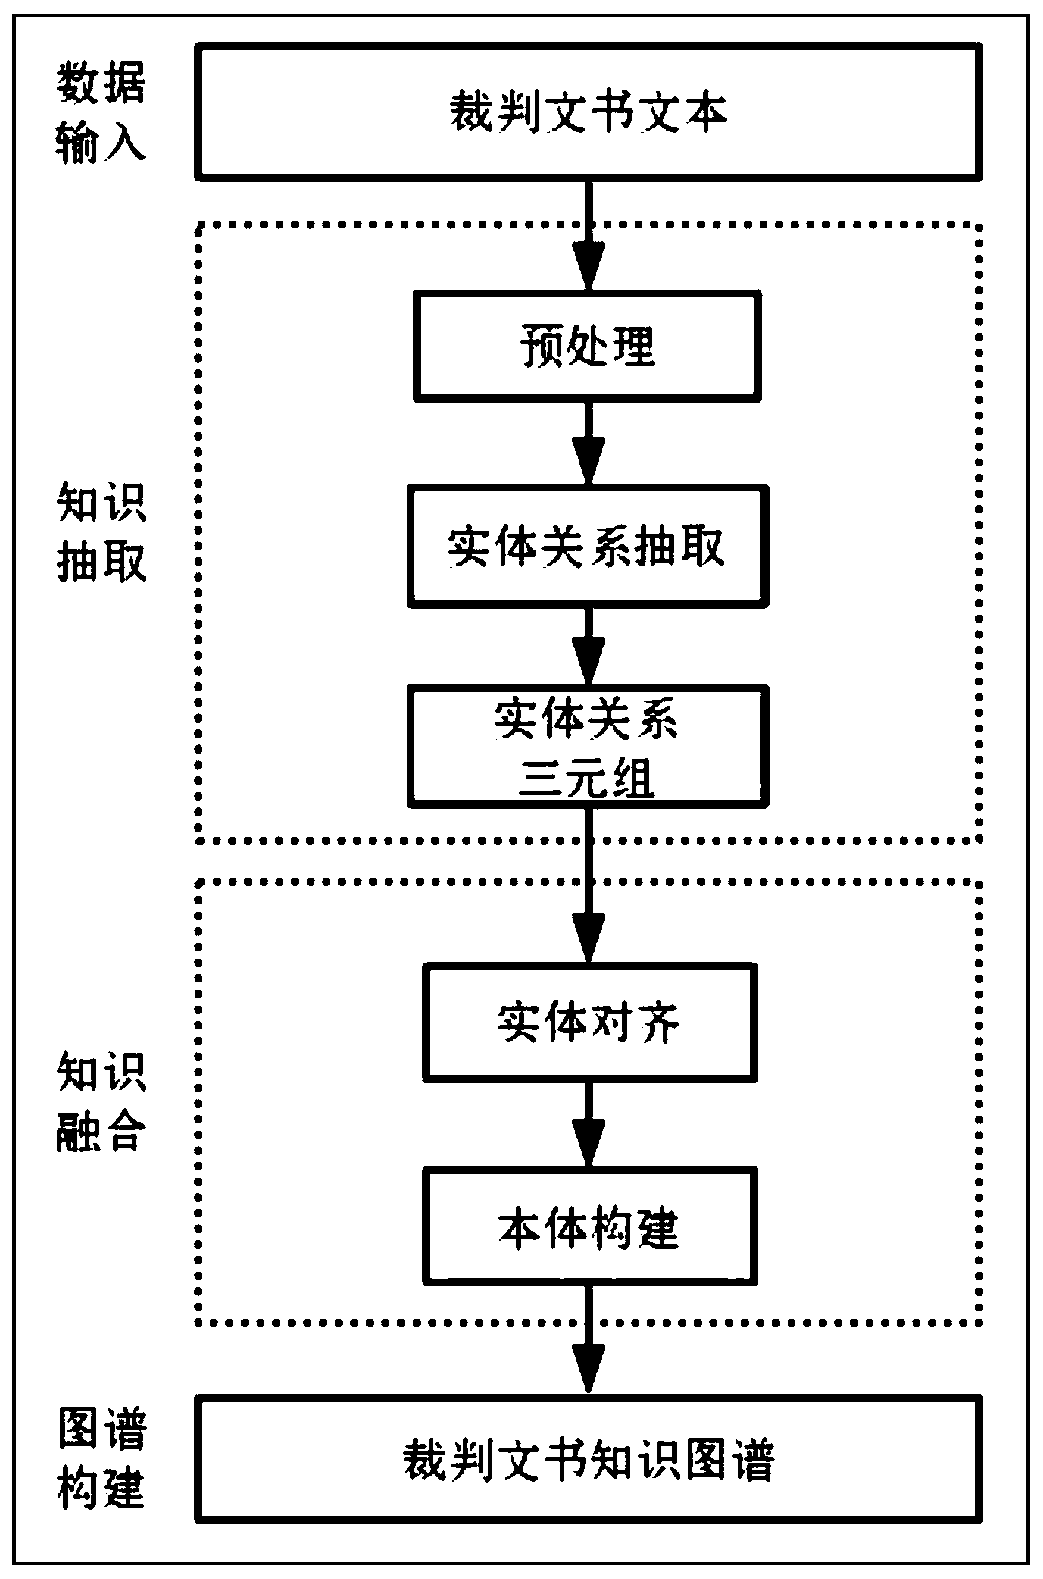 Judicial case knowledge graph construction method of dependency syntactic analysis relation extraction model